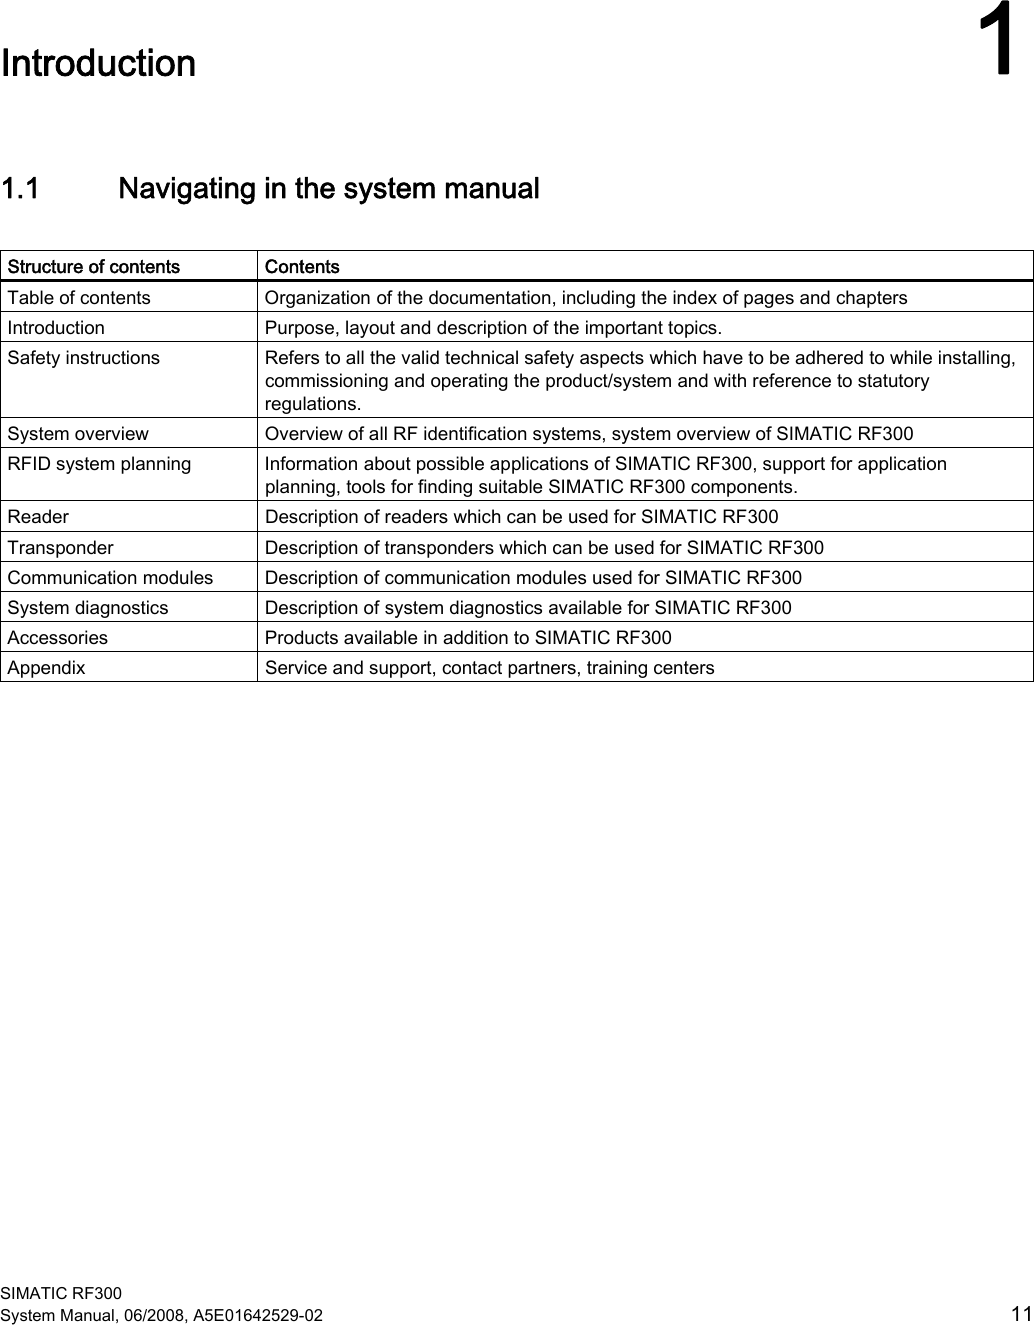  SIMATIC RF300 System Manual, 06/2008, A5E01642529-02  11 Introduction 11.1 Navigating in the system manual  Structure of contents   Contents Table of contents  Organization of the documentation, including the index of pages and chapters Introduction  Purpose, layout and description of the important topics. Safety instructions  Refers to all the valid technical safety aspects which have to be adhered to while installing, commissioning and operating the product/system and with reference to statutory regulations. System overview  Overview of all RF identification systems, system overview of SIMATIC RF300 RFID system planning  Information about possible applications of SIMATIC RF300, support for application planning, tools for finding suitable SIMATIC RF300 components.  Reader   Description of readers which can be used for SIMATIC RF300 Transponder  Description of transponders which can be used for SIMATIC RF300 Communication modules  Description of communication modules used for SIMATIC RF300 System diagnostics  Description of system diagnostics available for SIMATIC RF300 Accessories  Products available in addition to SIMATIC RF300 Appendix  Service and support, contact partners, training centers  